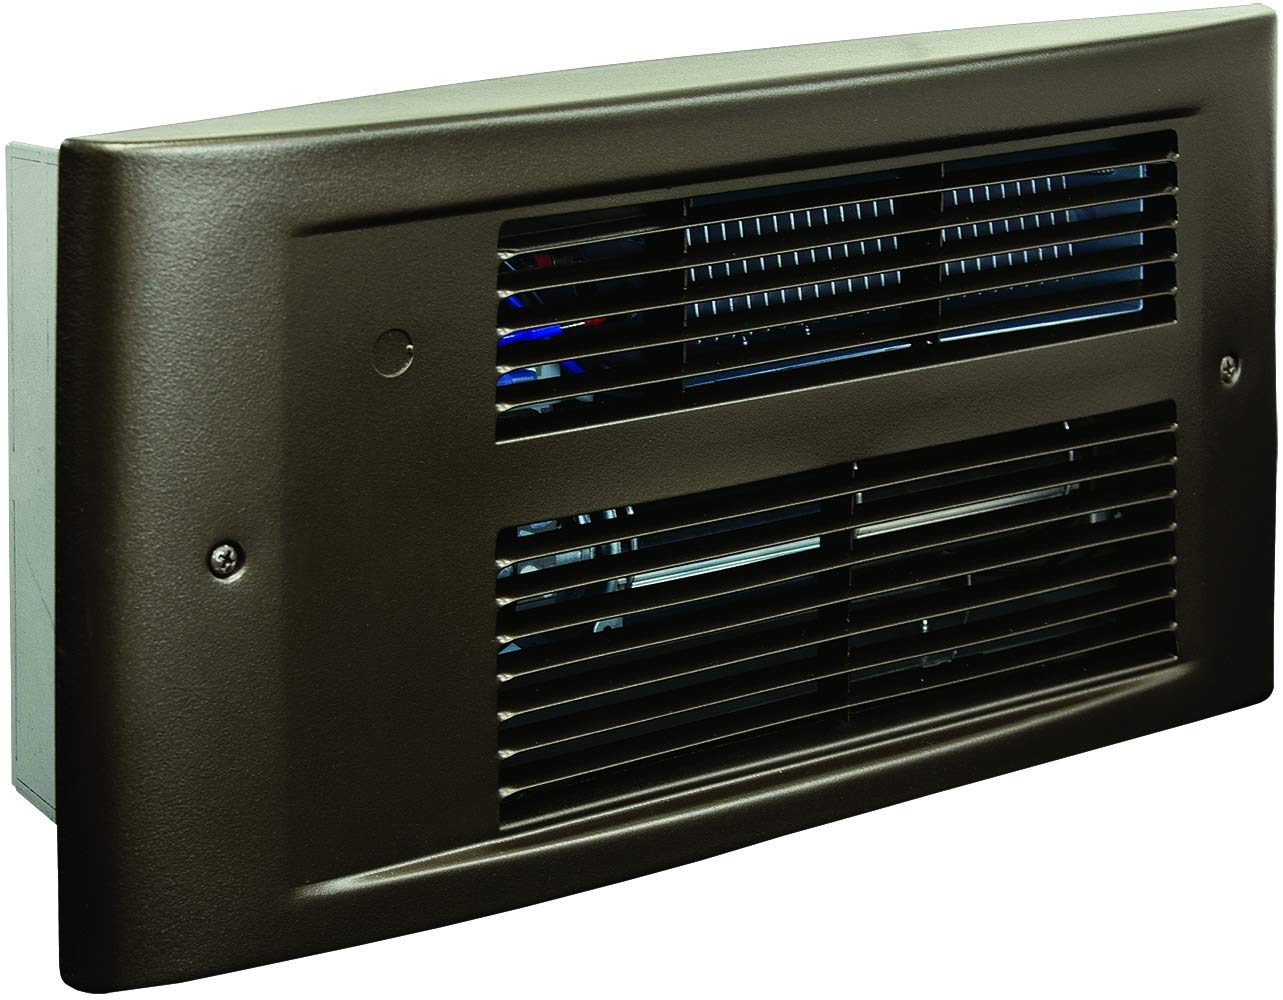 PX 208V, 1750W, OILED BRONZE, COLOR PACKAGING